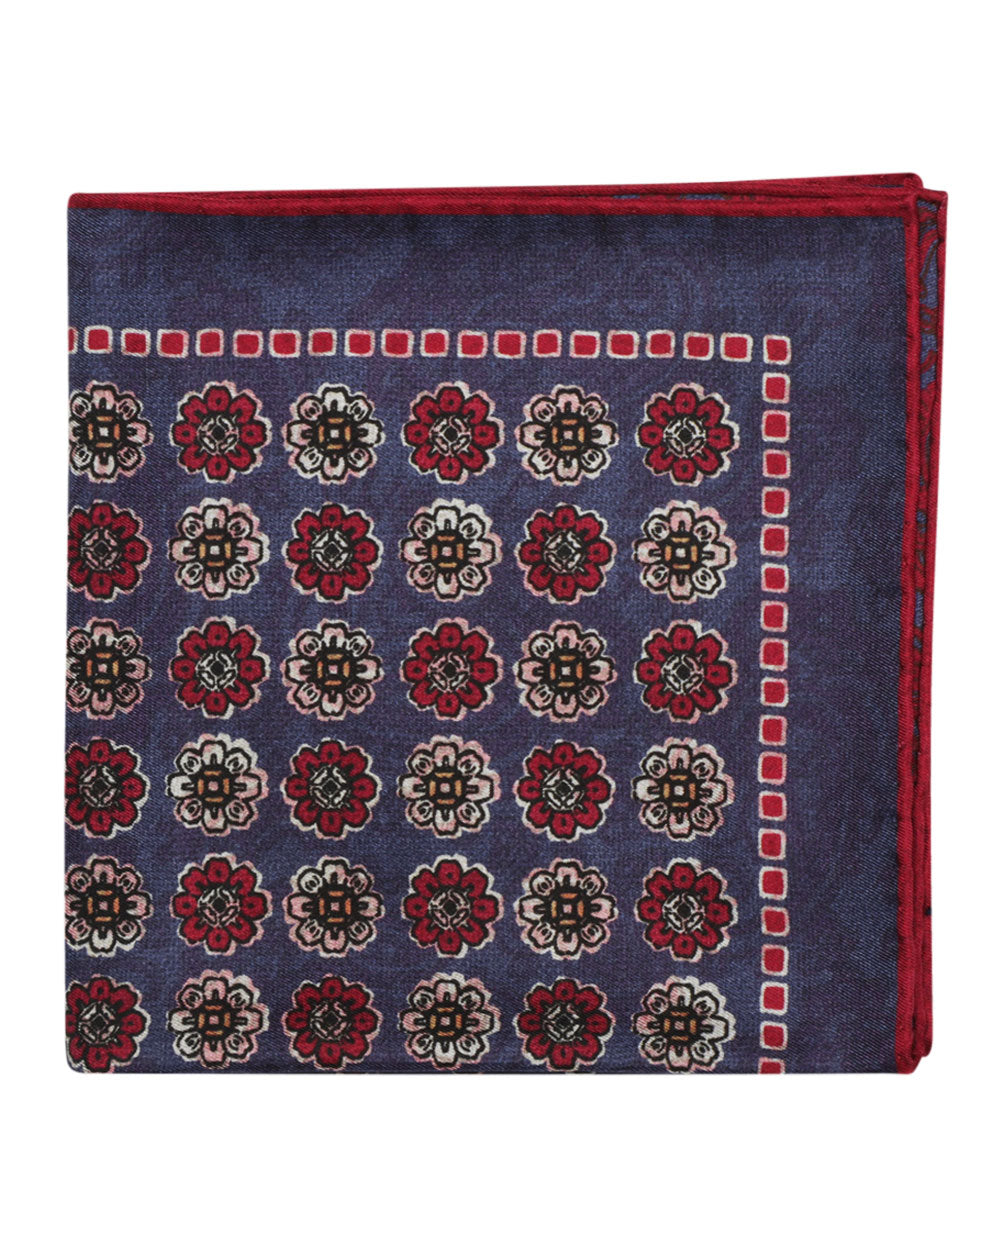 Blue and Red Floral and Paisley Reversible Silk Pocket Square